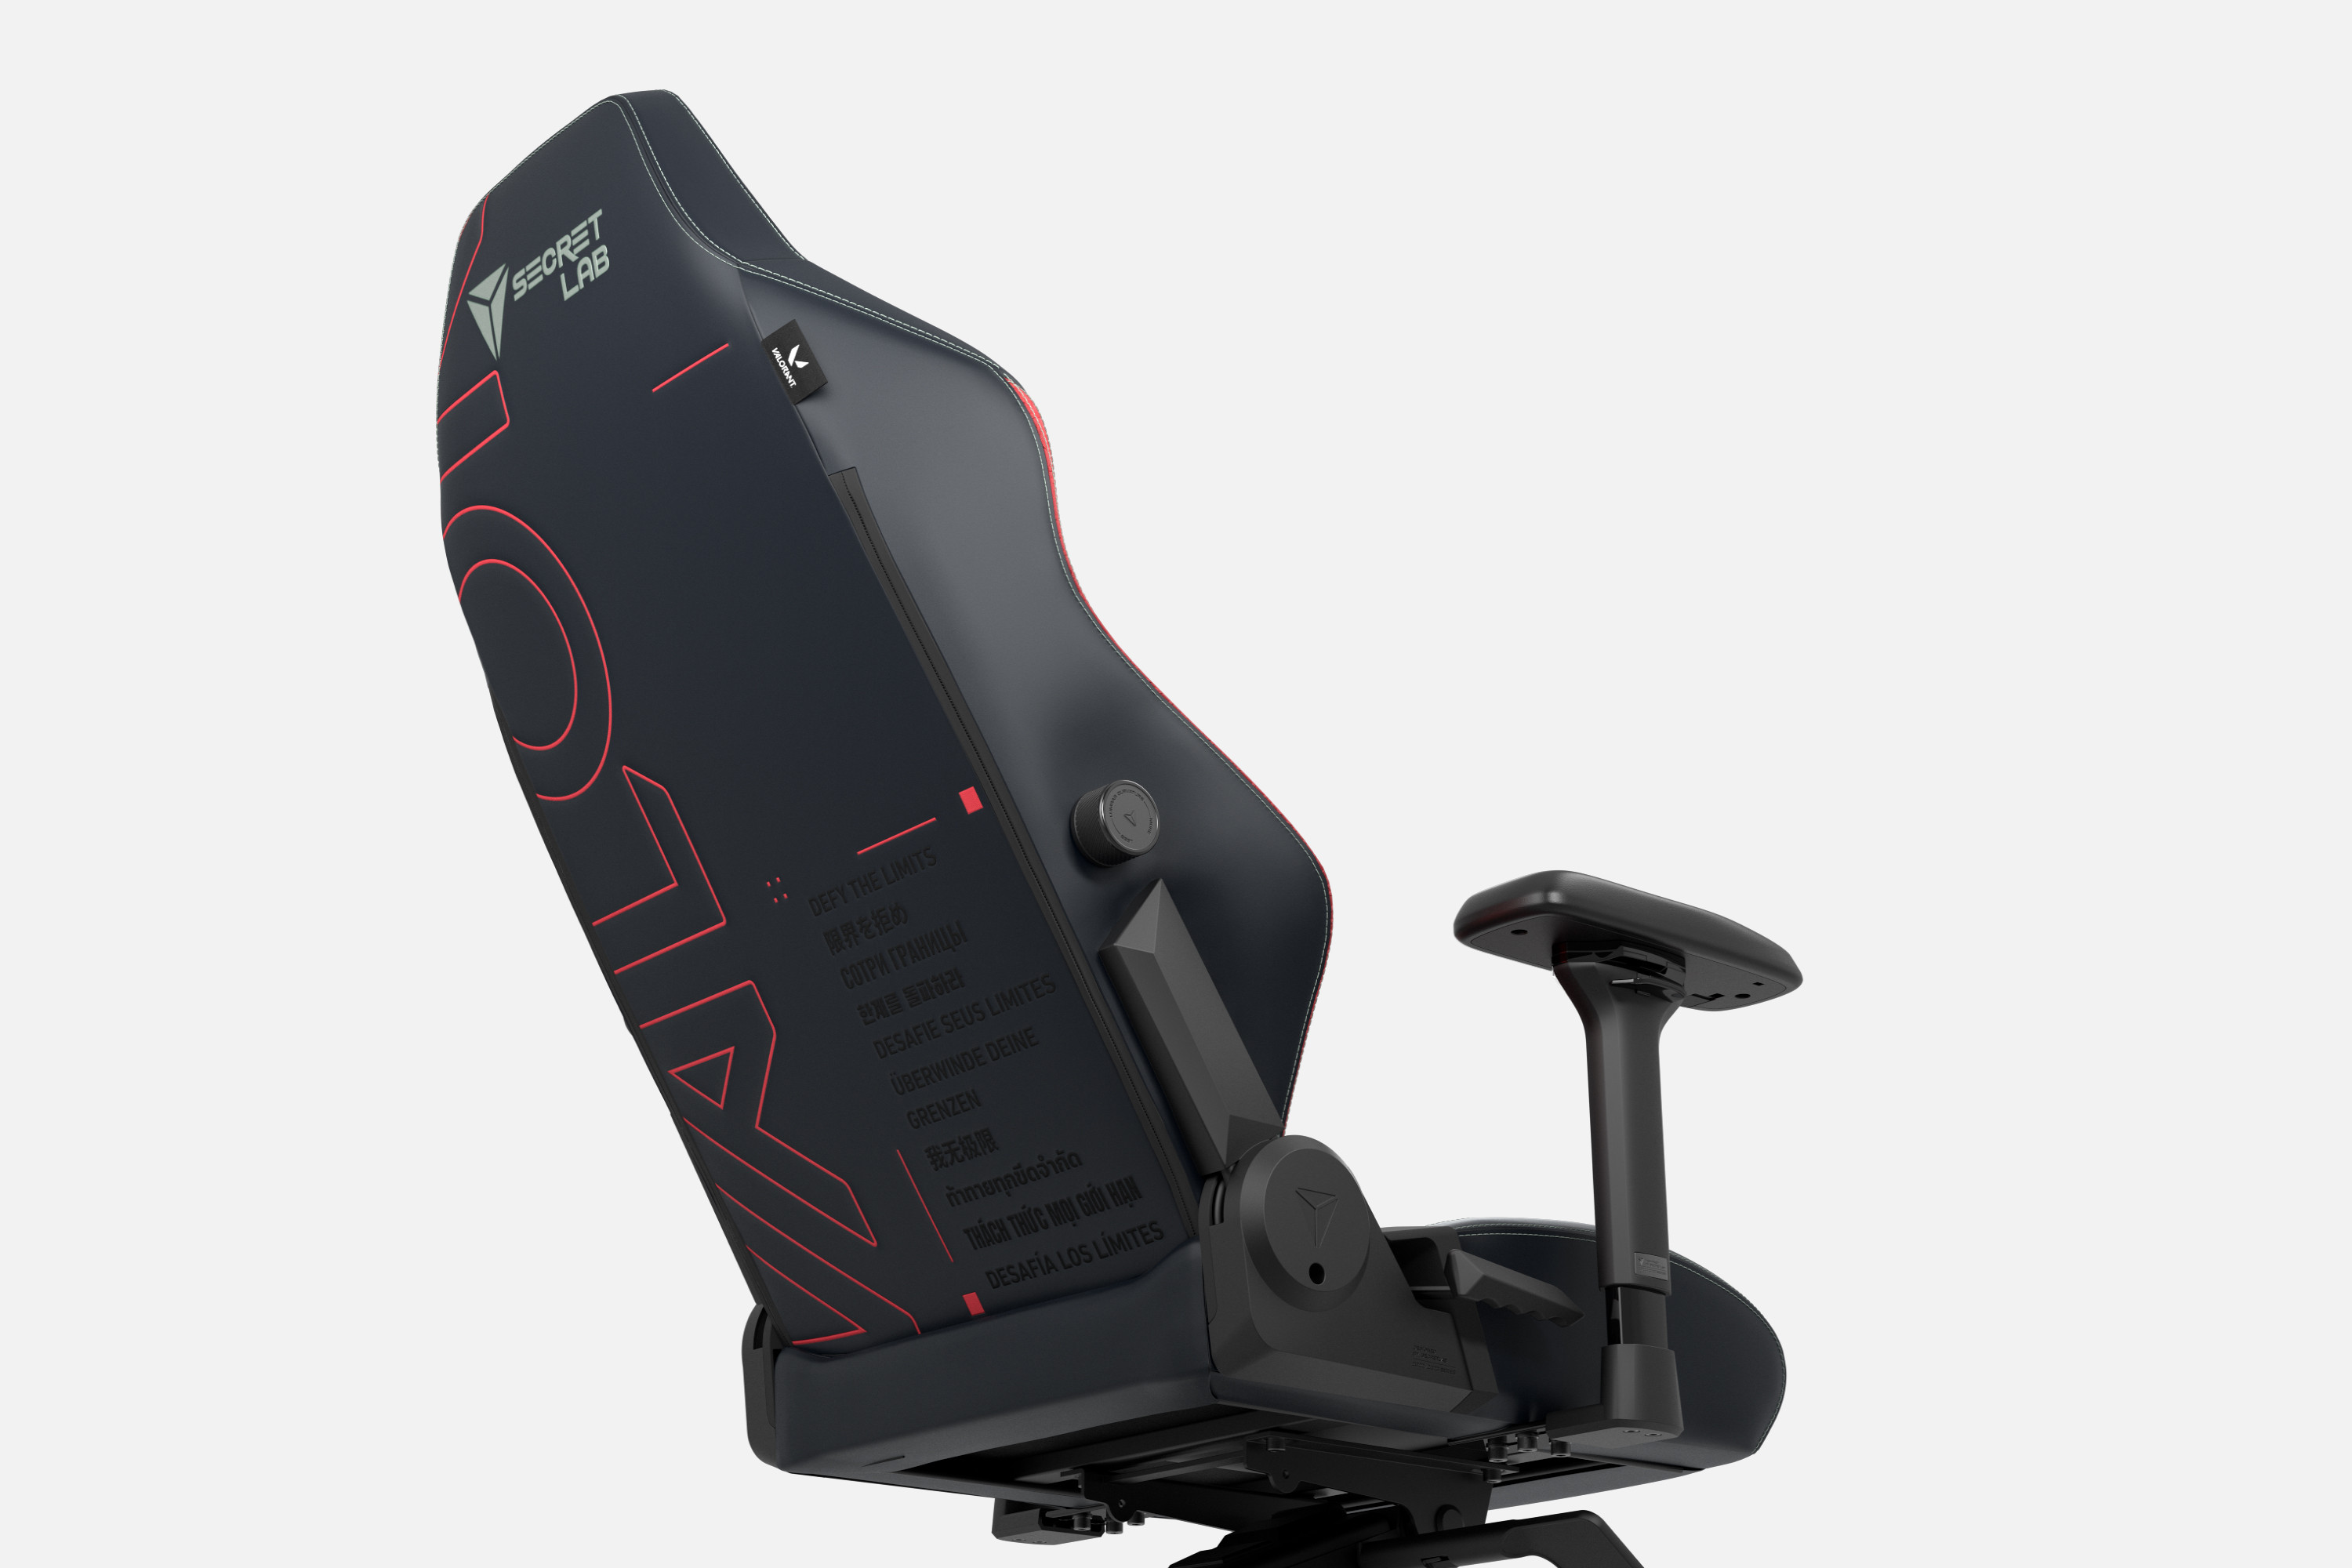 These Secretlab Valorant chairs are a must-have for duelists